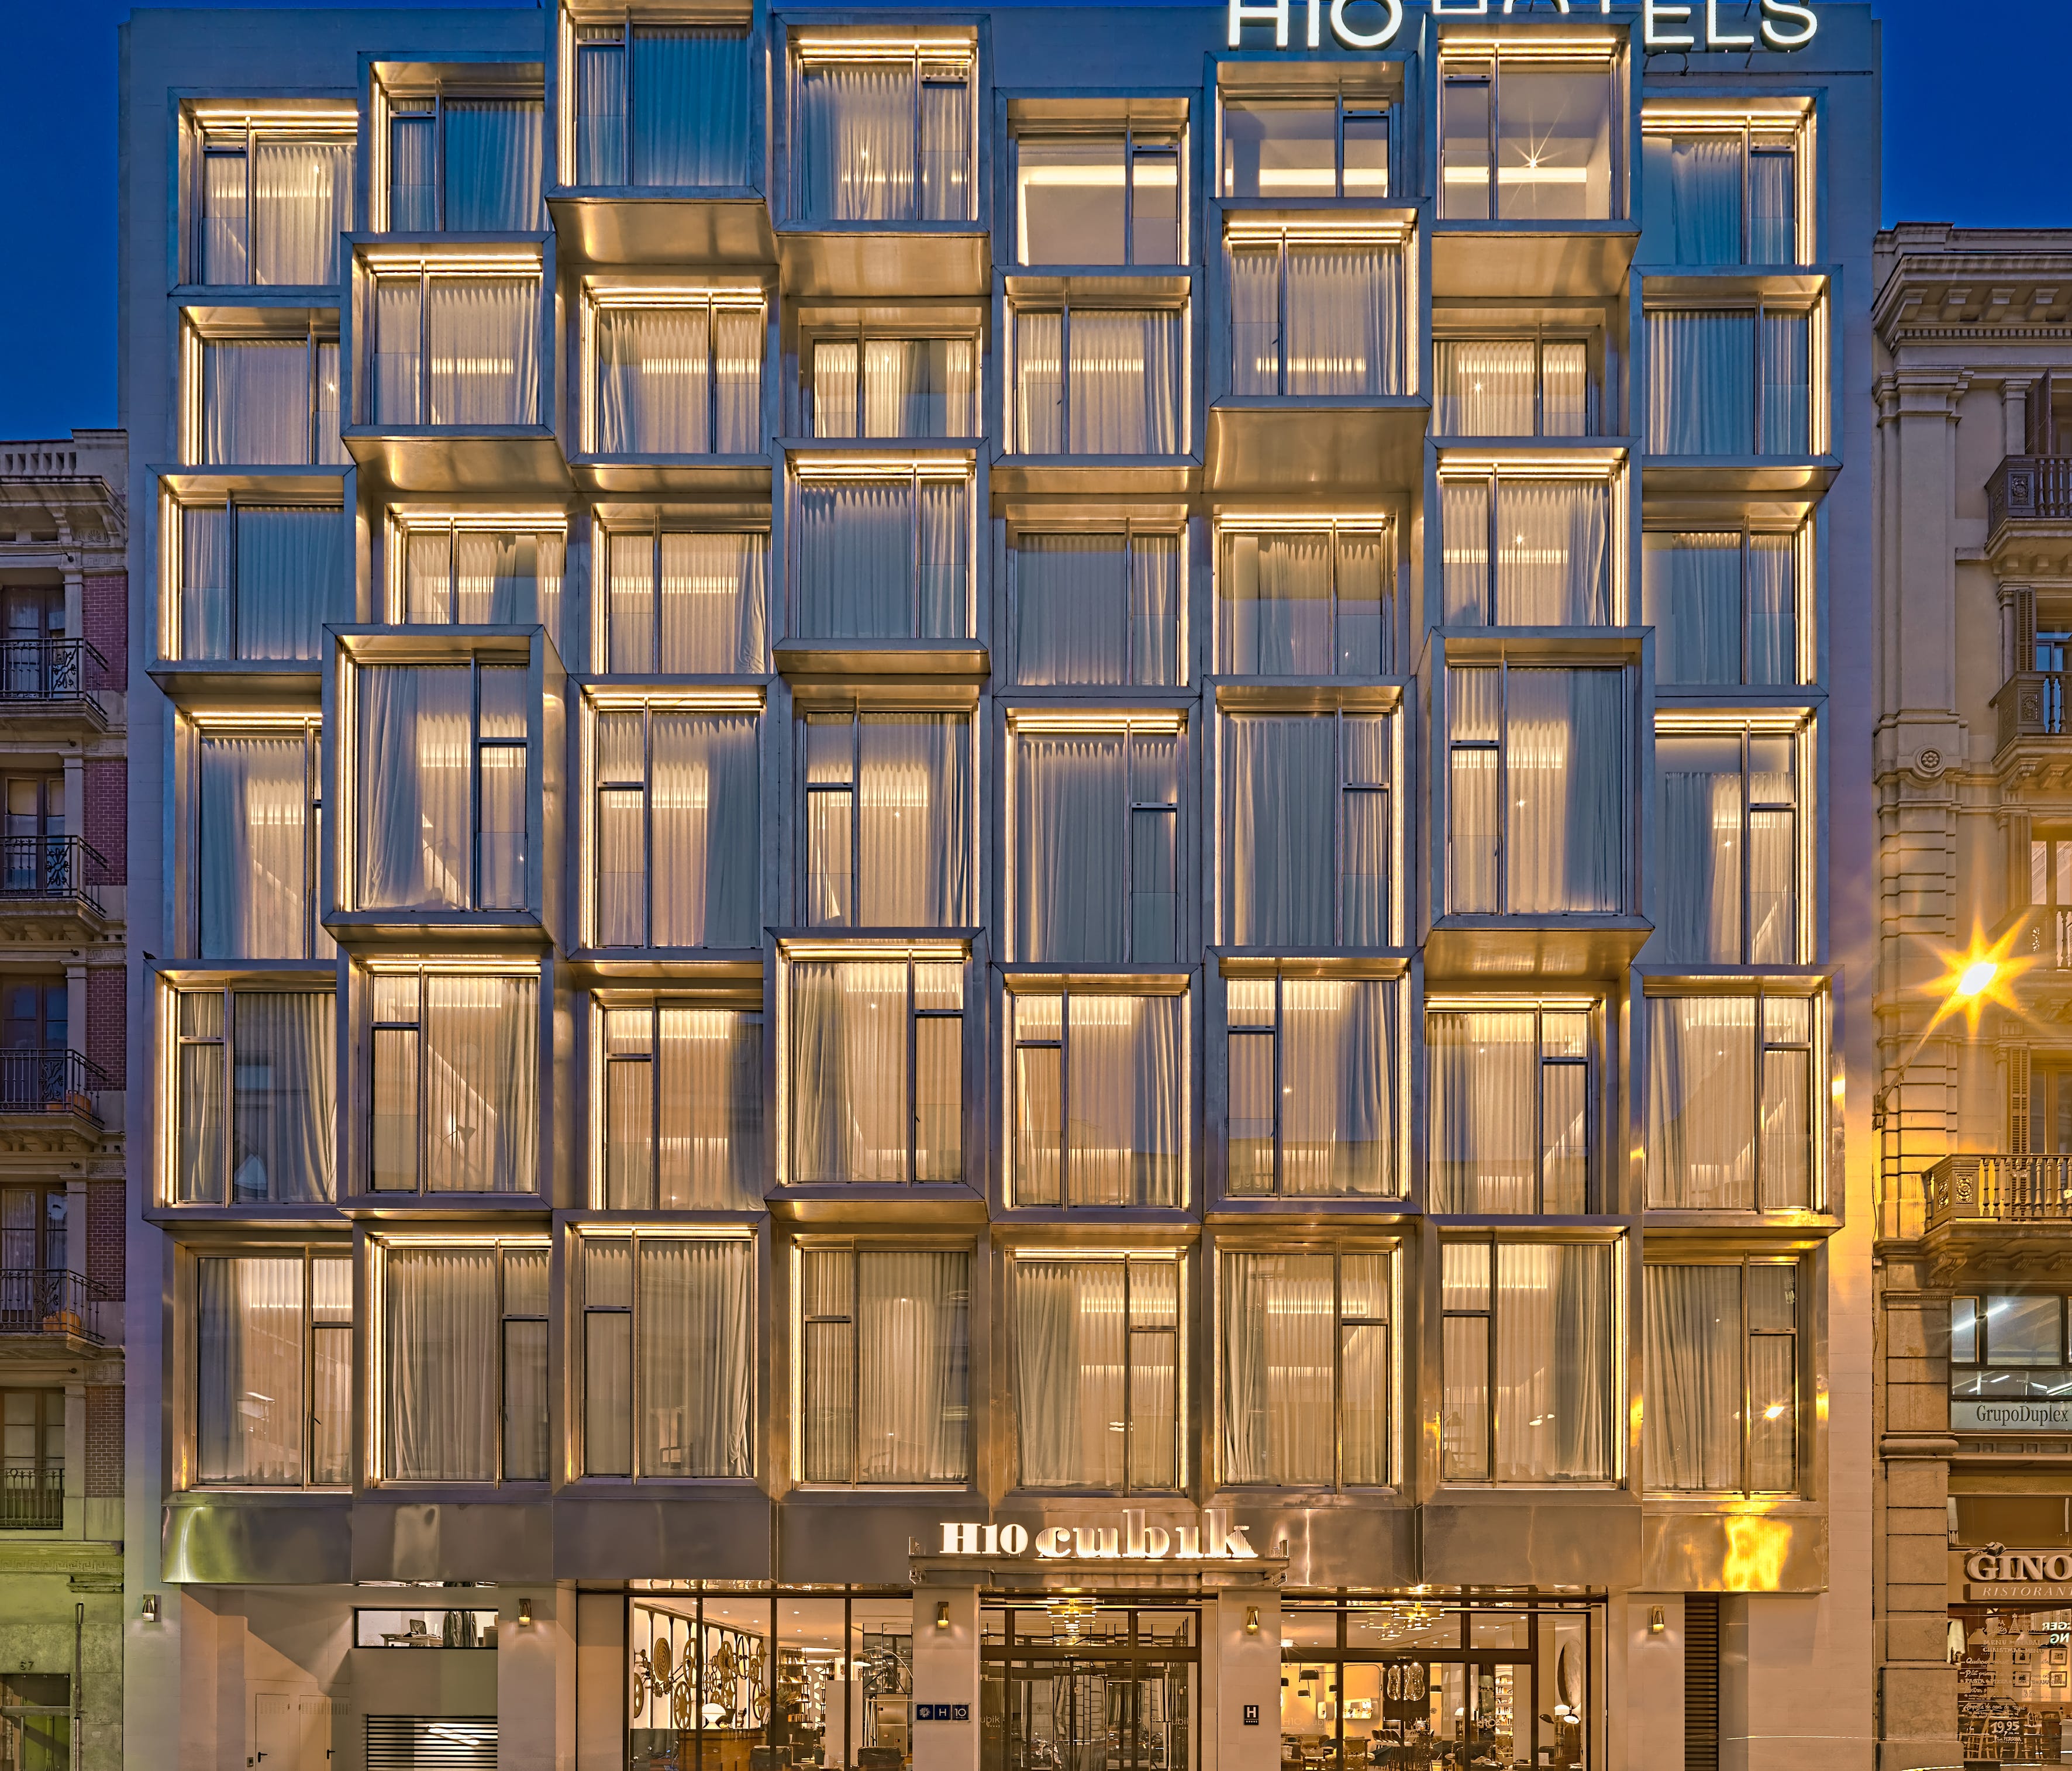 H10 Cubik is the 19th best reviewed hotel in Barcelona, according to Booking.com.